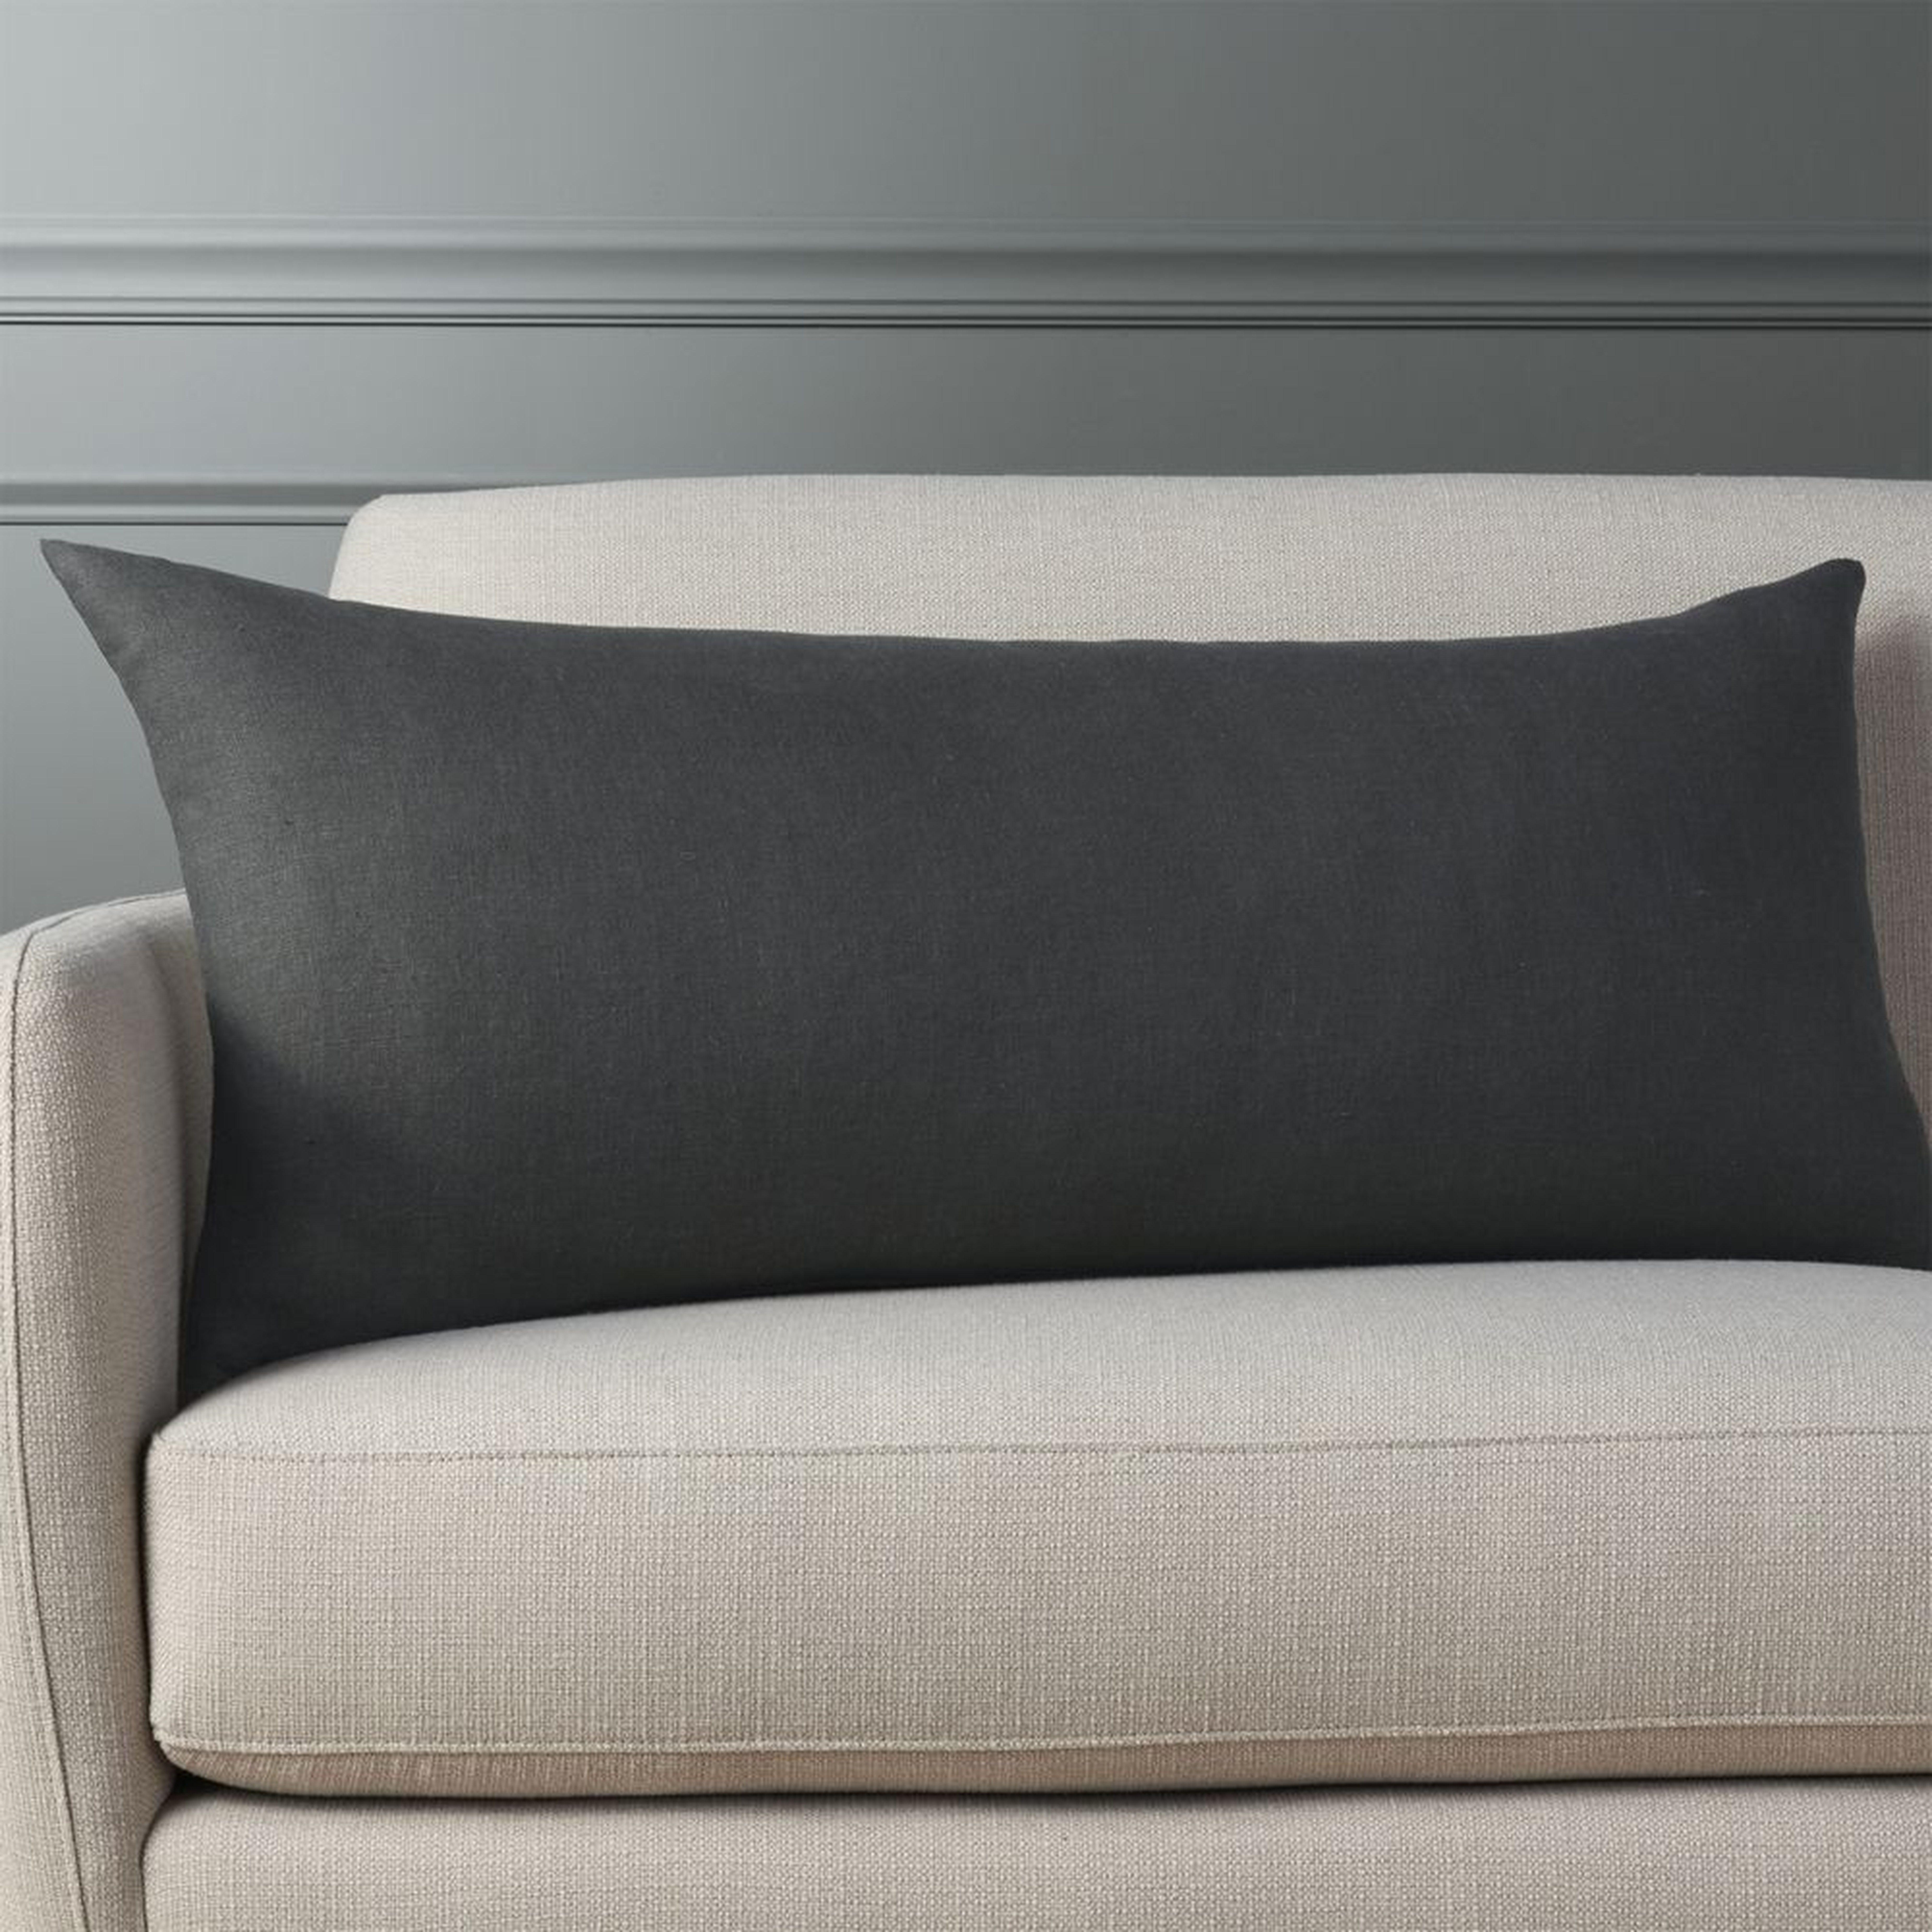 "36""x16"" linon dark grey pillow with feather-down insert" - CB2